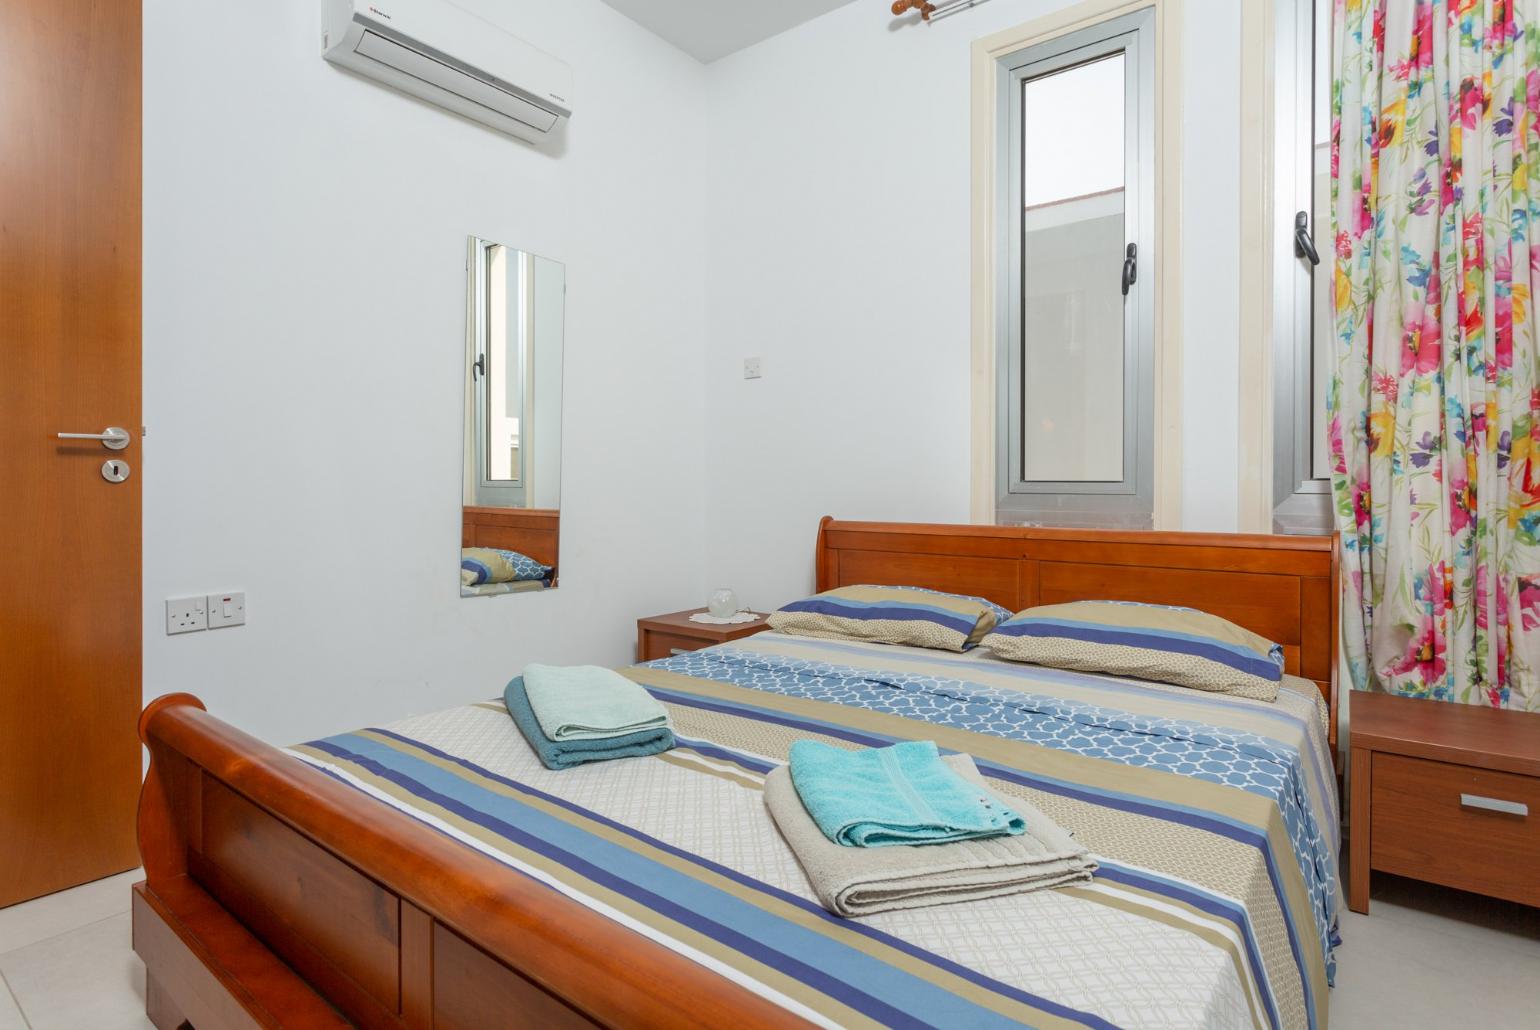 Double bedroom with A/C and satellite TV